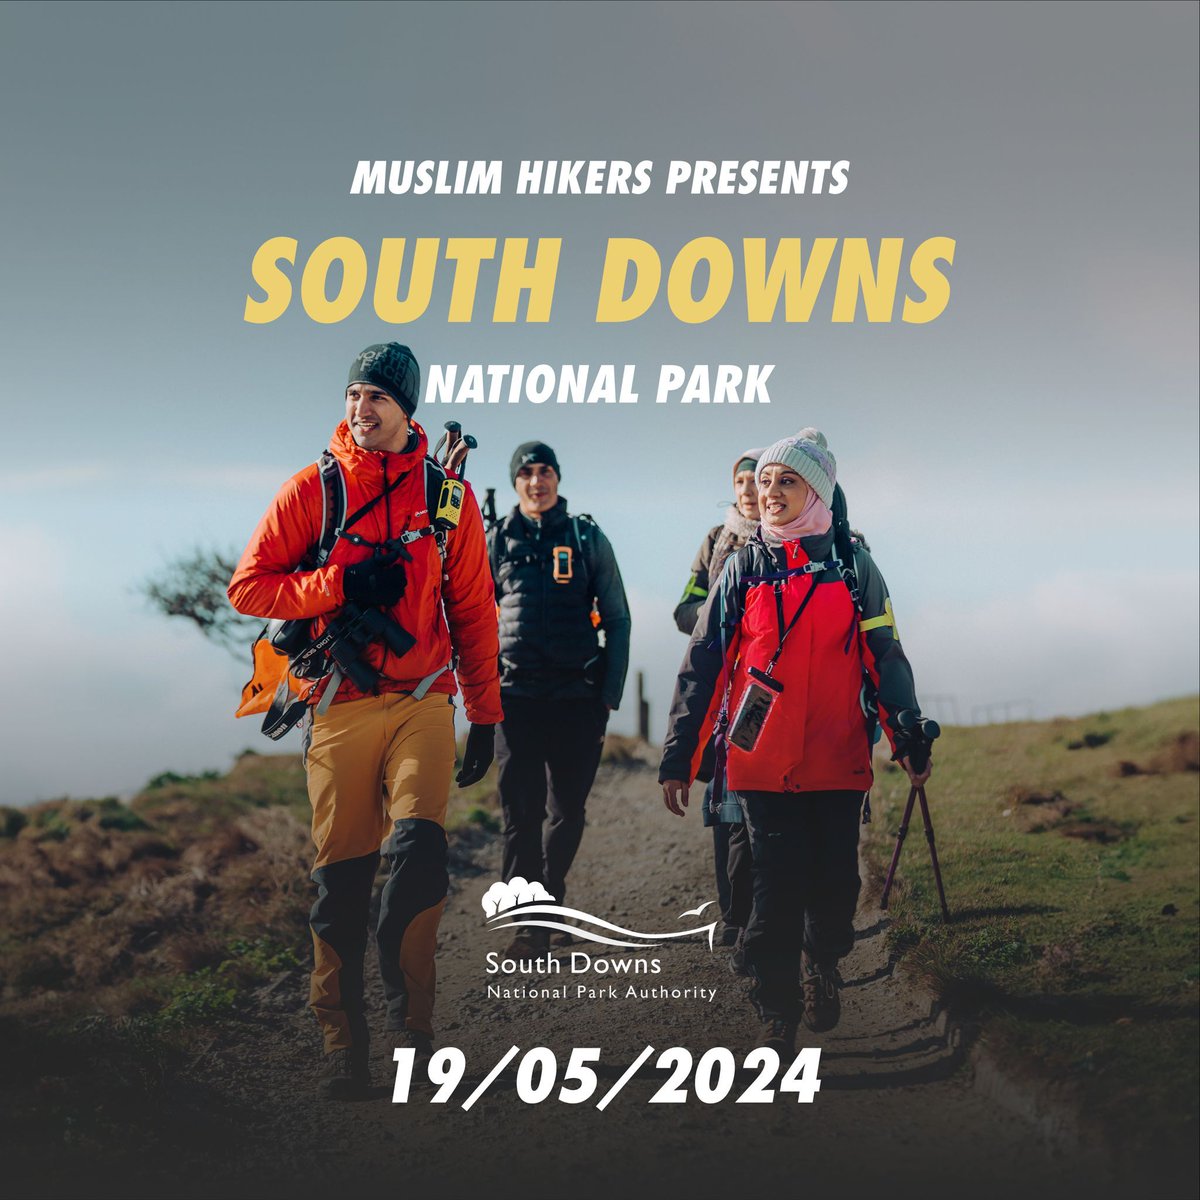 As part of #NationalWalkingMonth, we're excited to welcome @Muslim_Hikers back to the South Downs on Sunday 19 May. All welcome regardless of religious background or ability. Limited spaces, so hurry, don't miss out >> buff.ly/49DsTZK